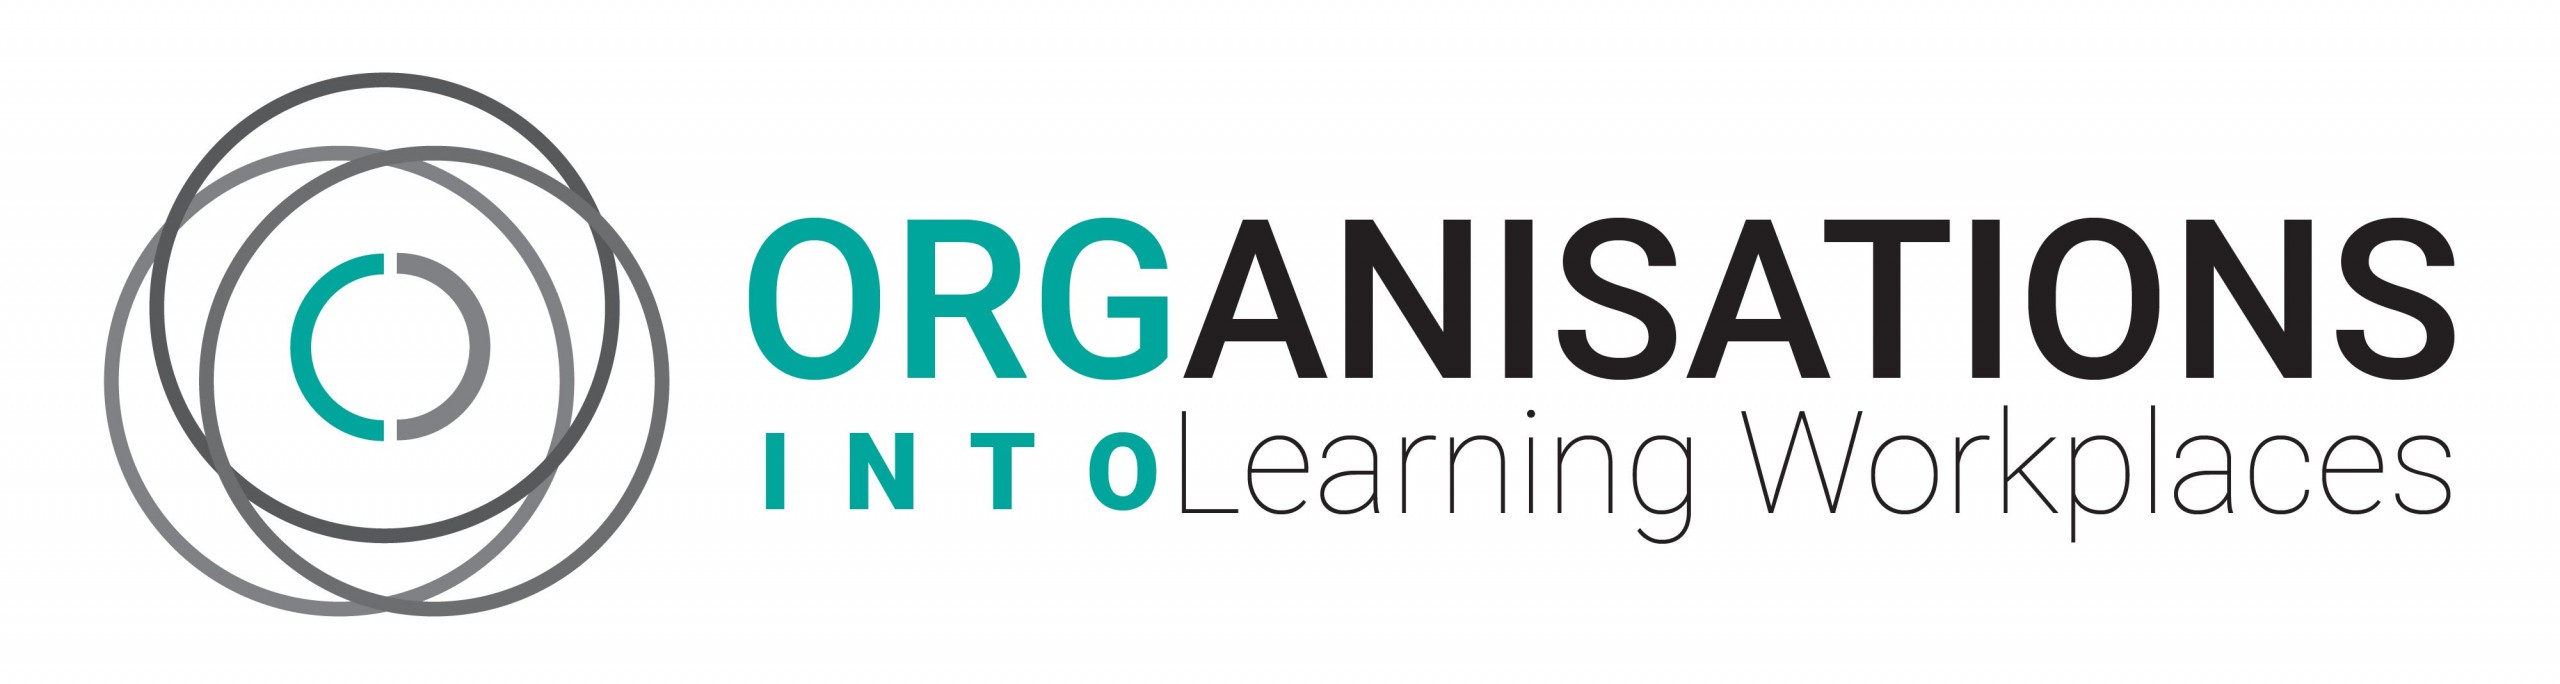 Learning Workplaces Logo